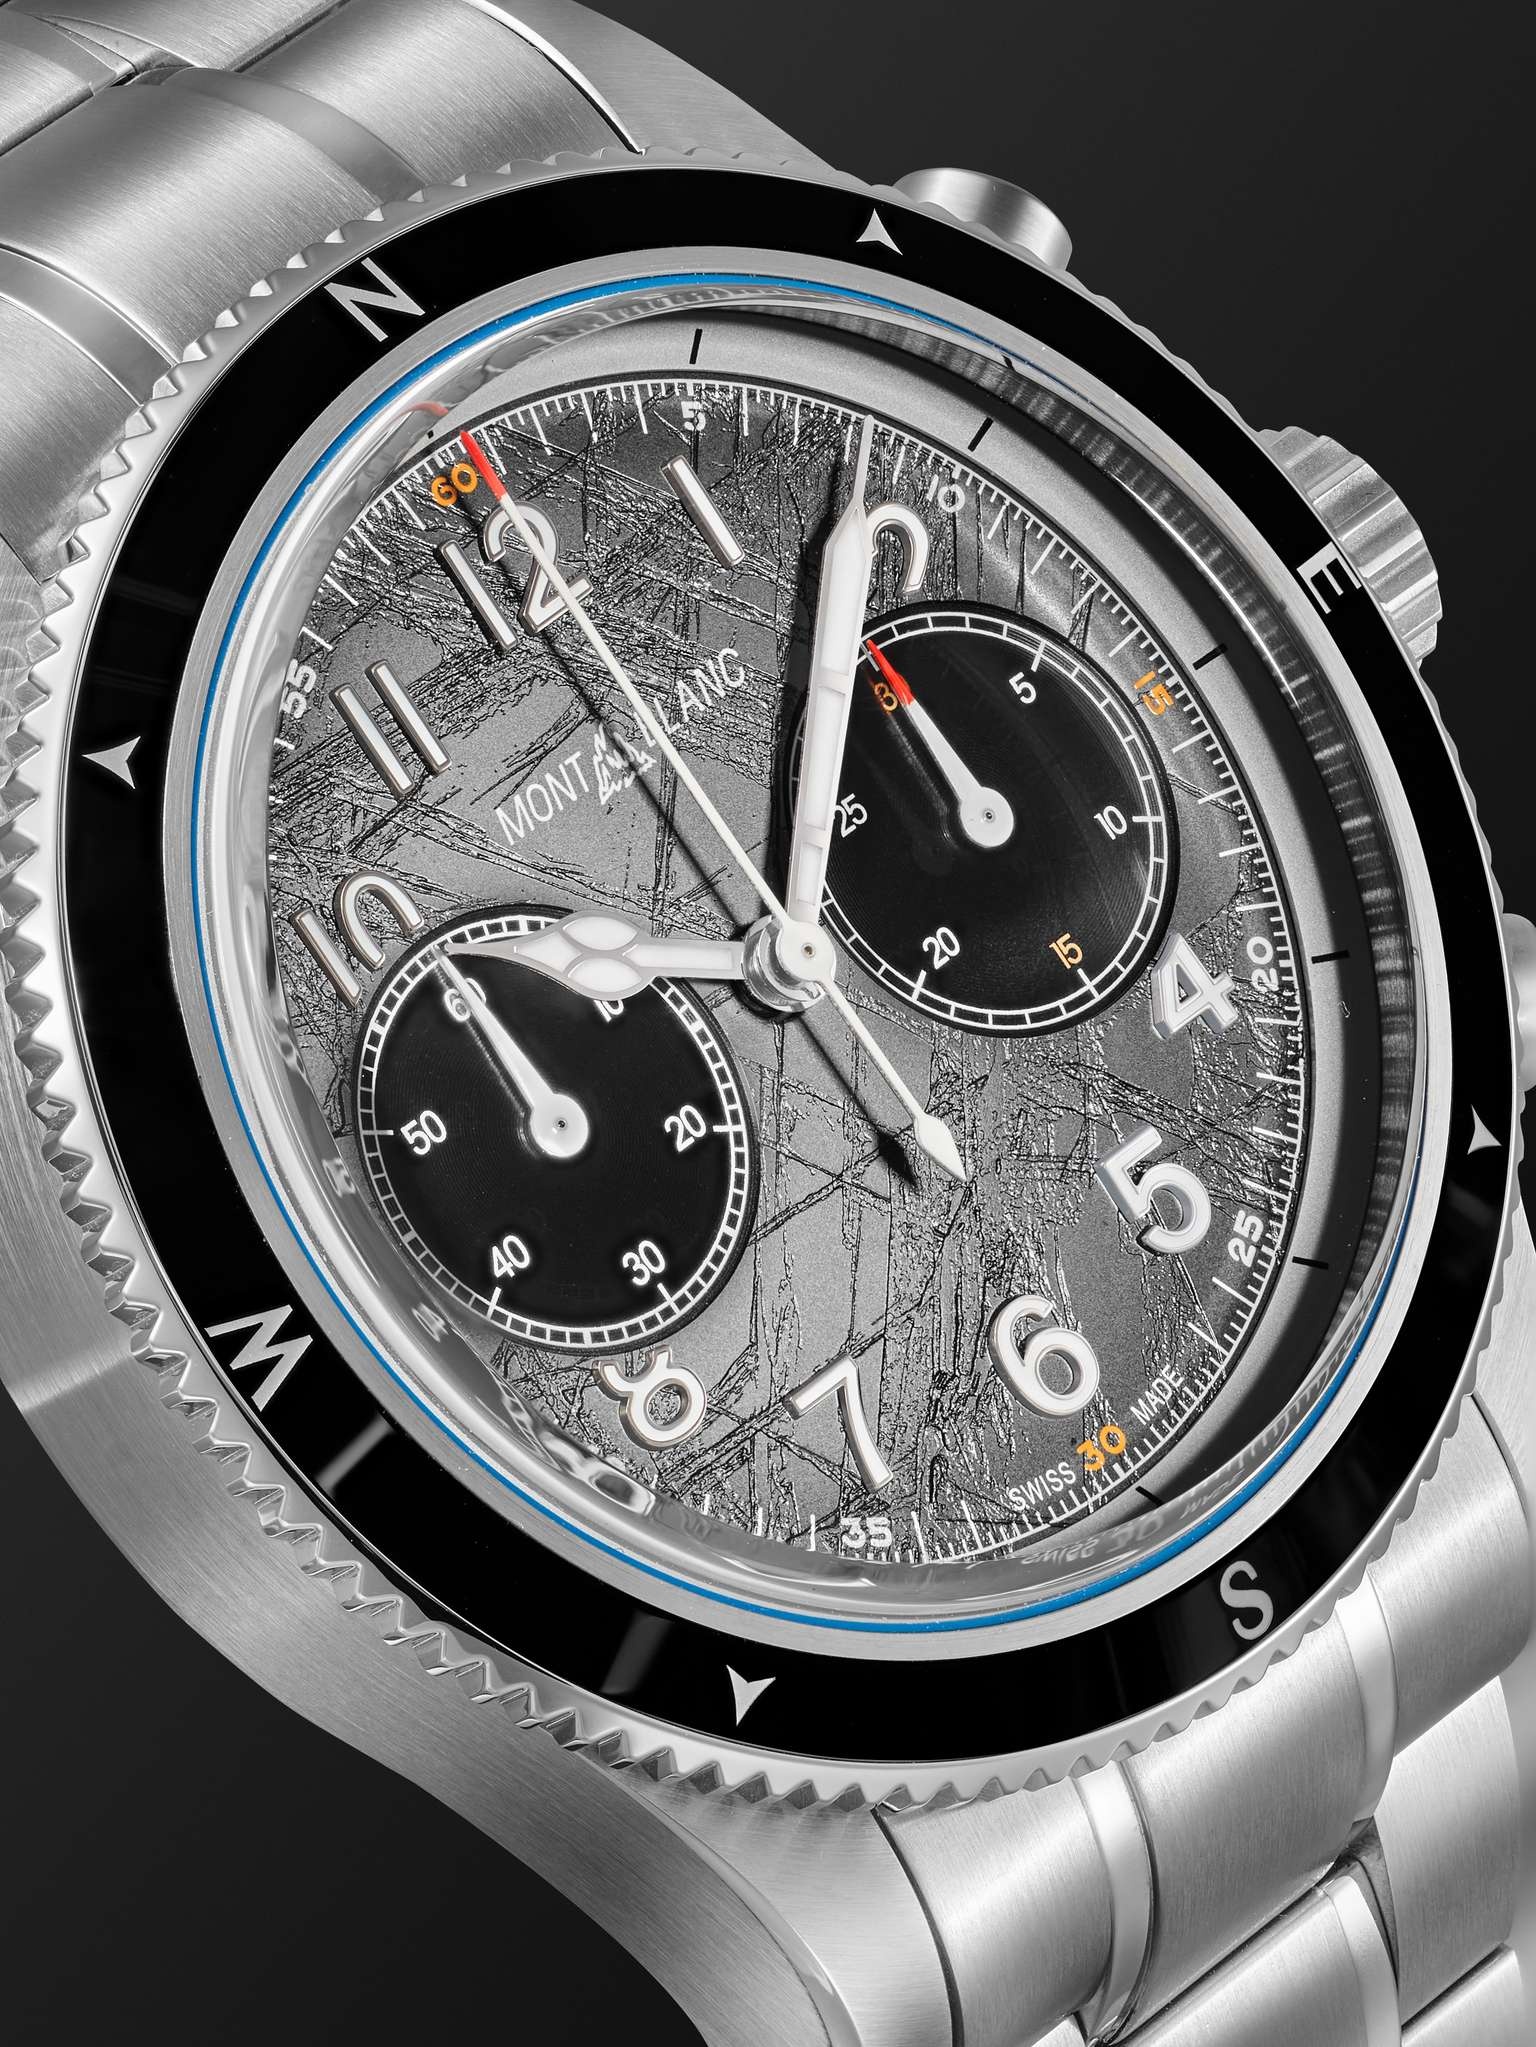 1858 0 Oxygen The 8000 Automatic Chronograph 42mm Stainless Steel Watch, Ref. No. 130983 - 5